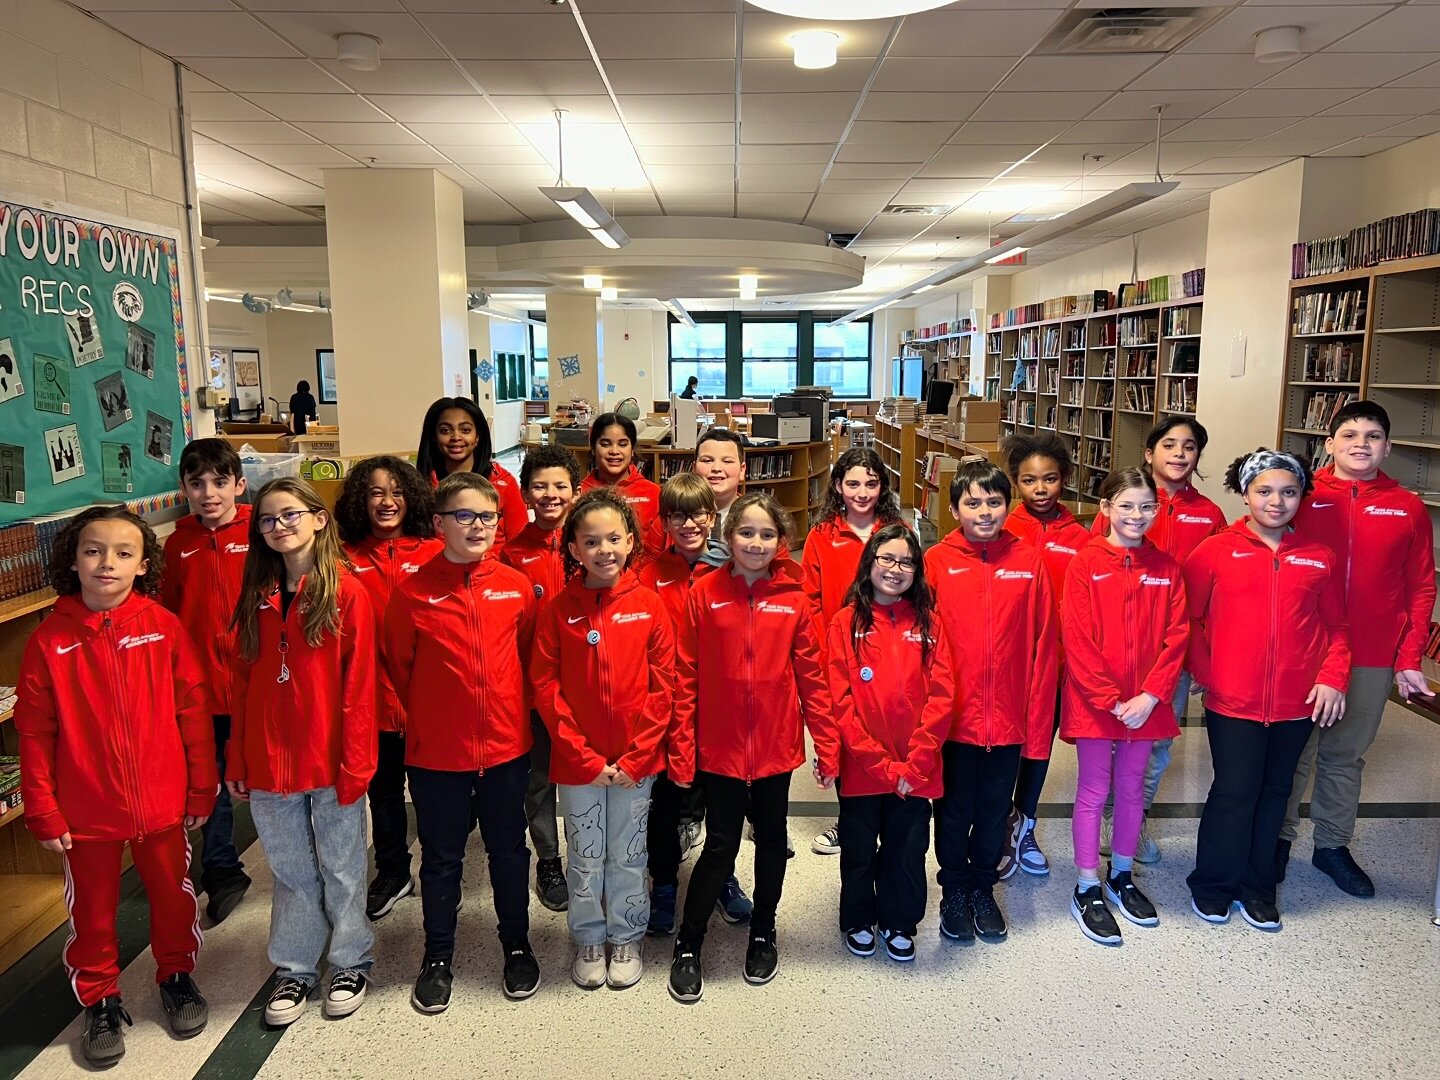 Great Minds shined at The First Lego League Qualifier Event this Sunday! We are excited to share that one of our groups received the Breakout Group Award, which recognizes teams with remarkable potential and overall performance. Additionally, one of 